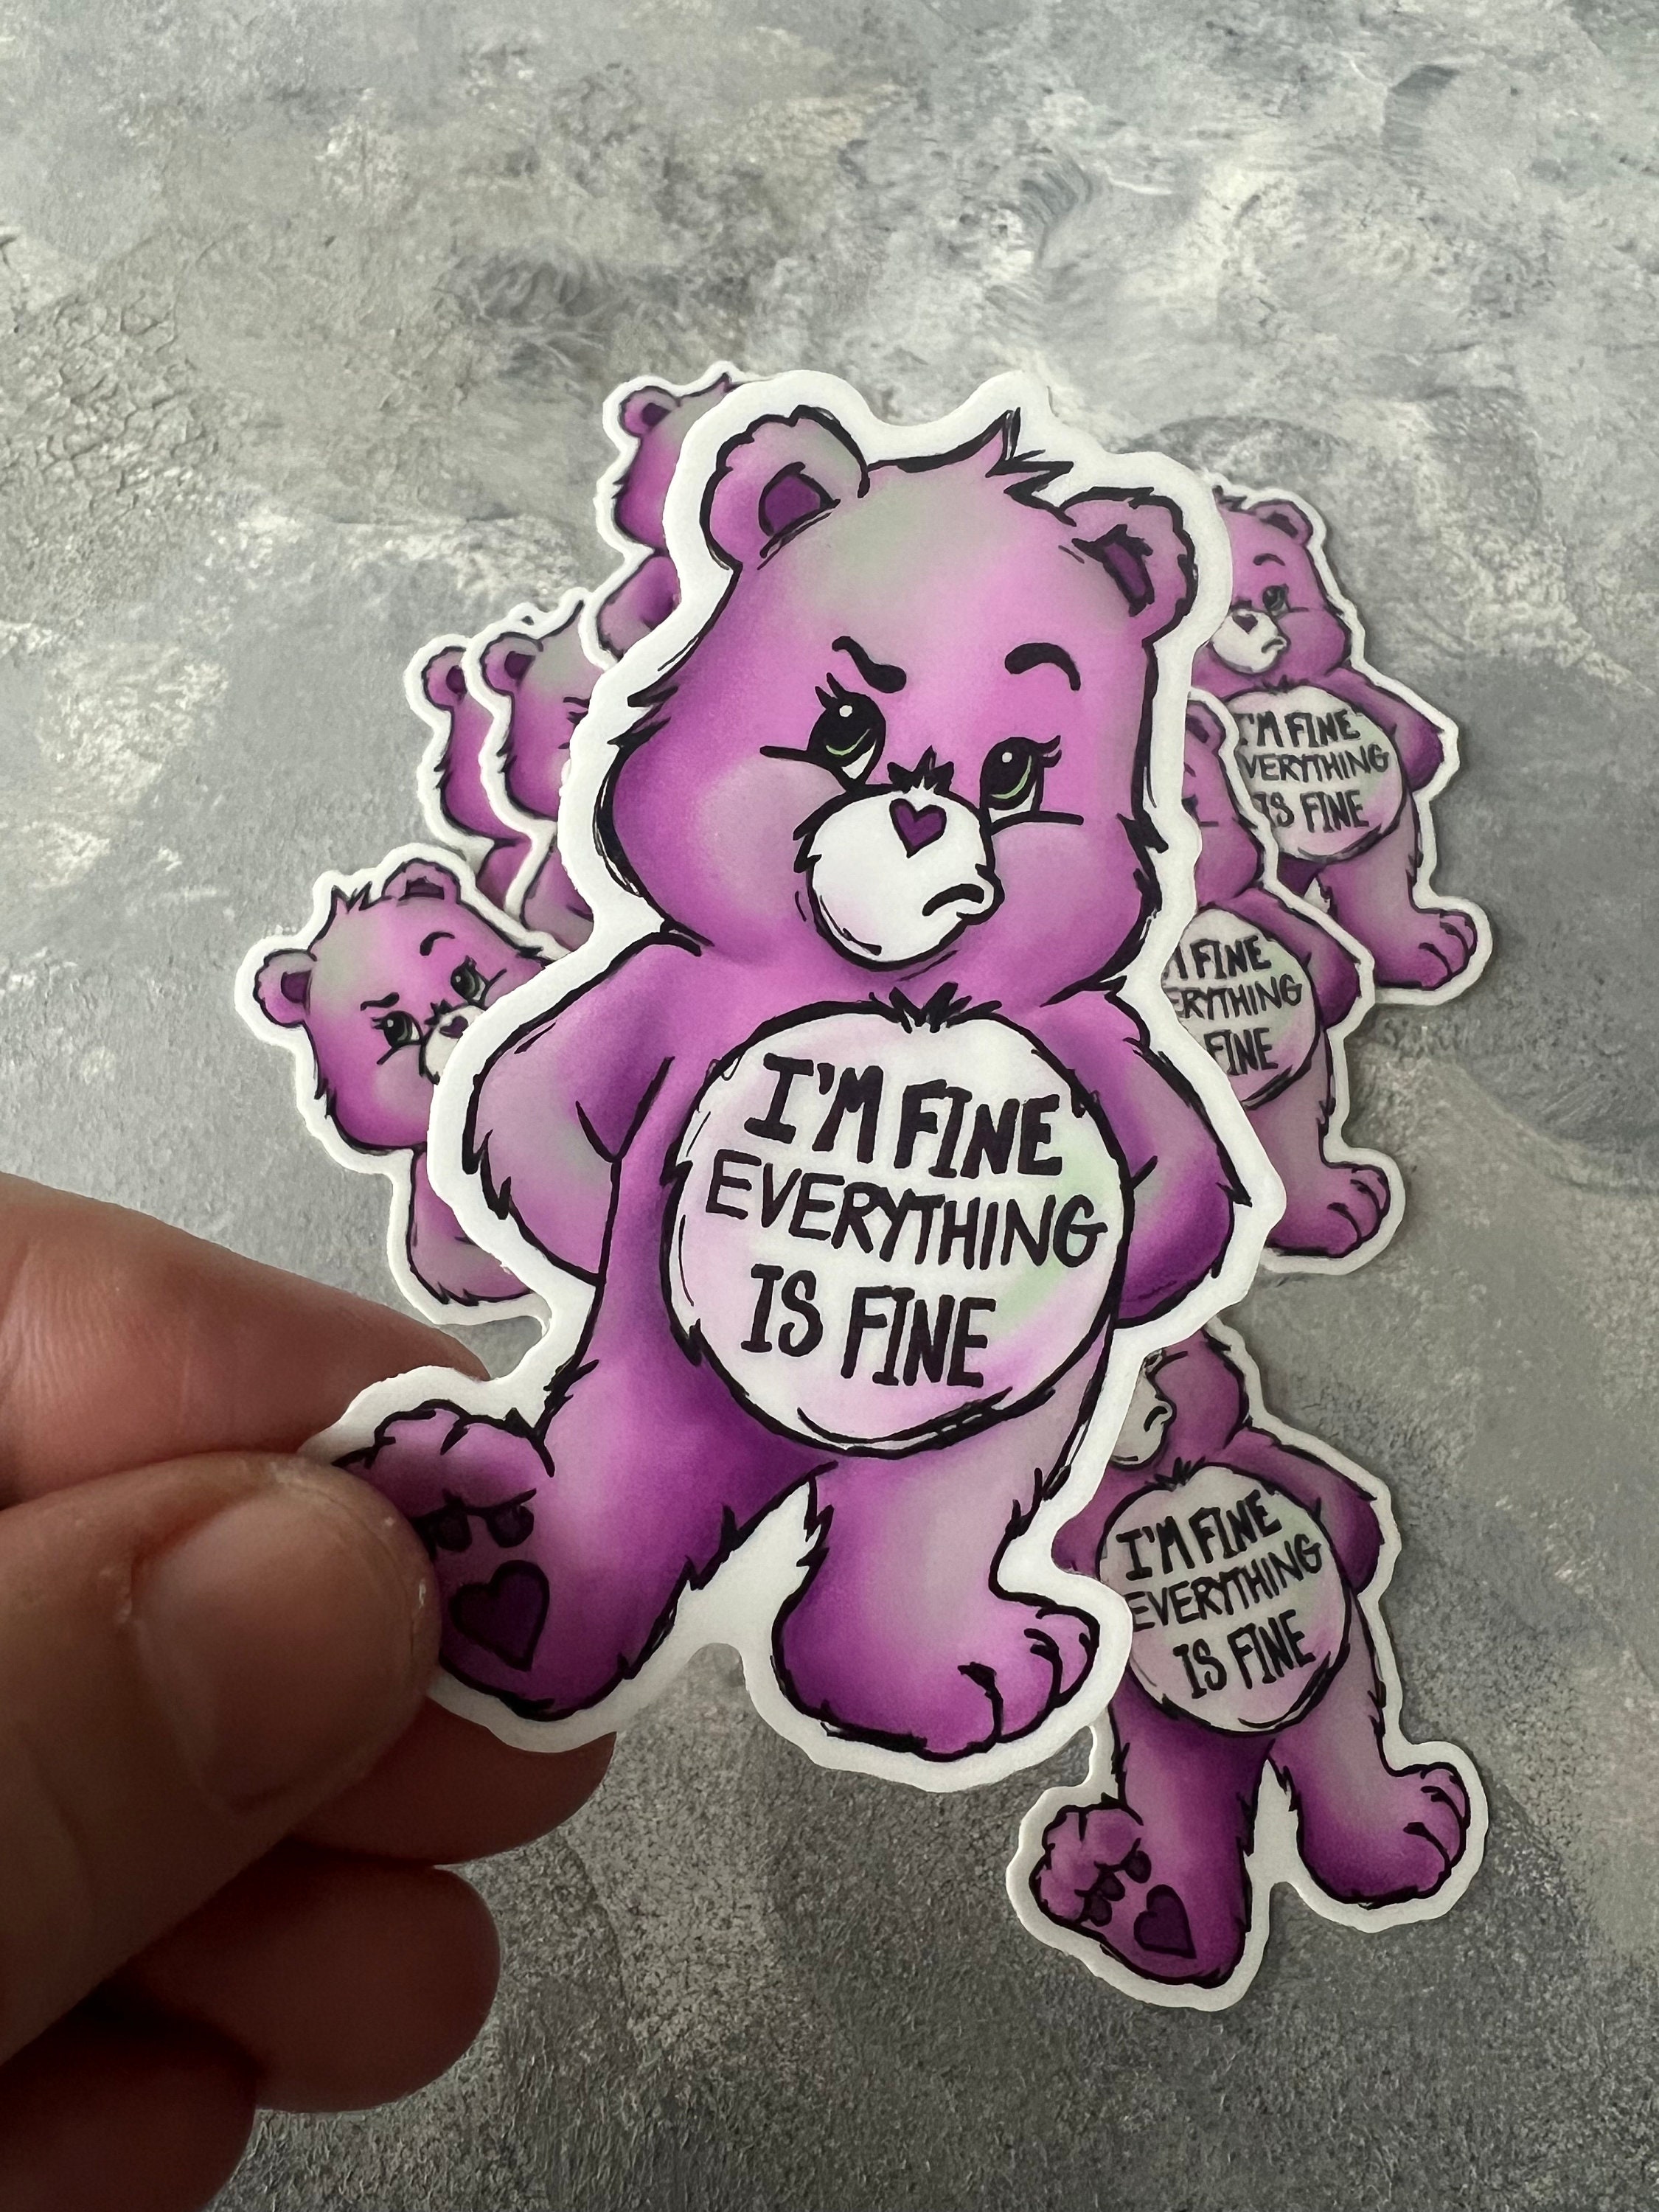 Care Bear stickers